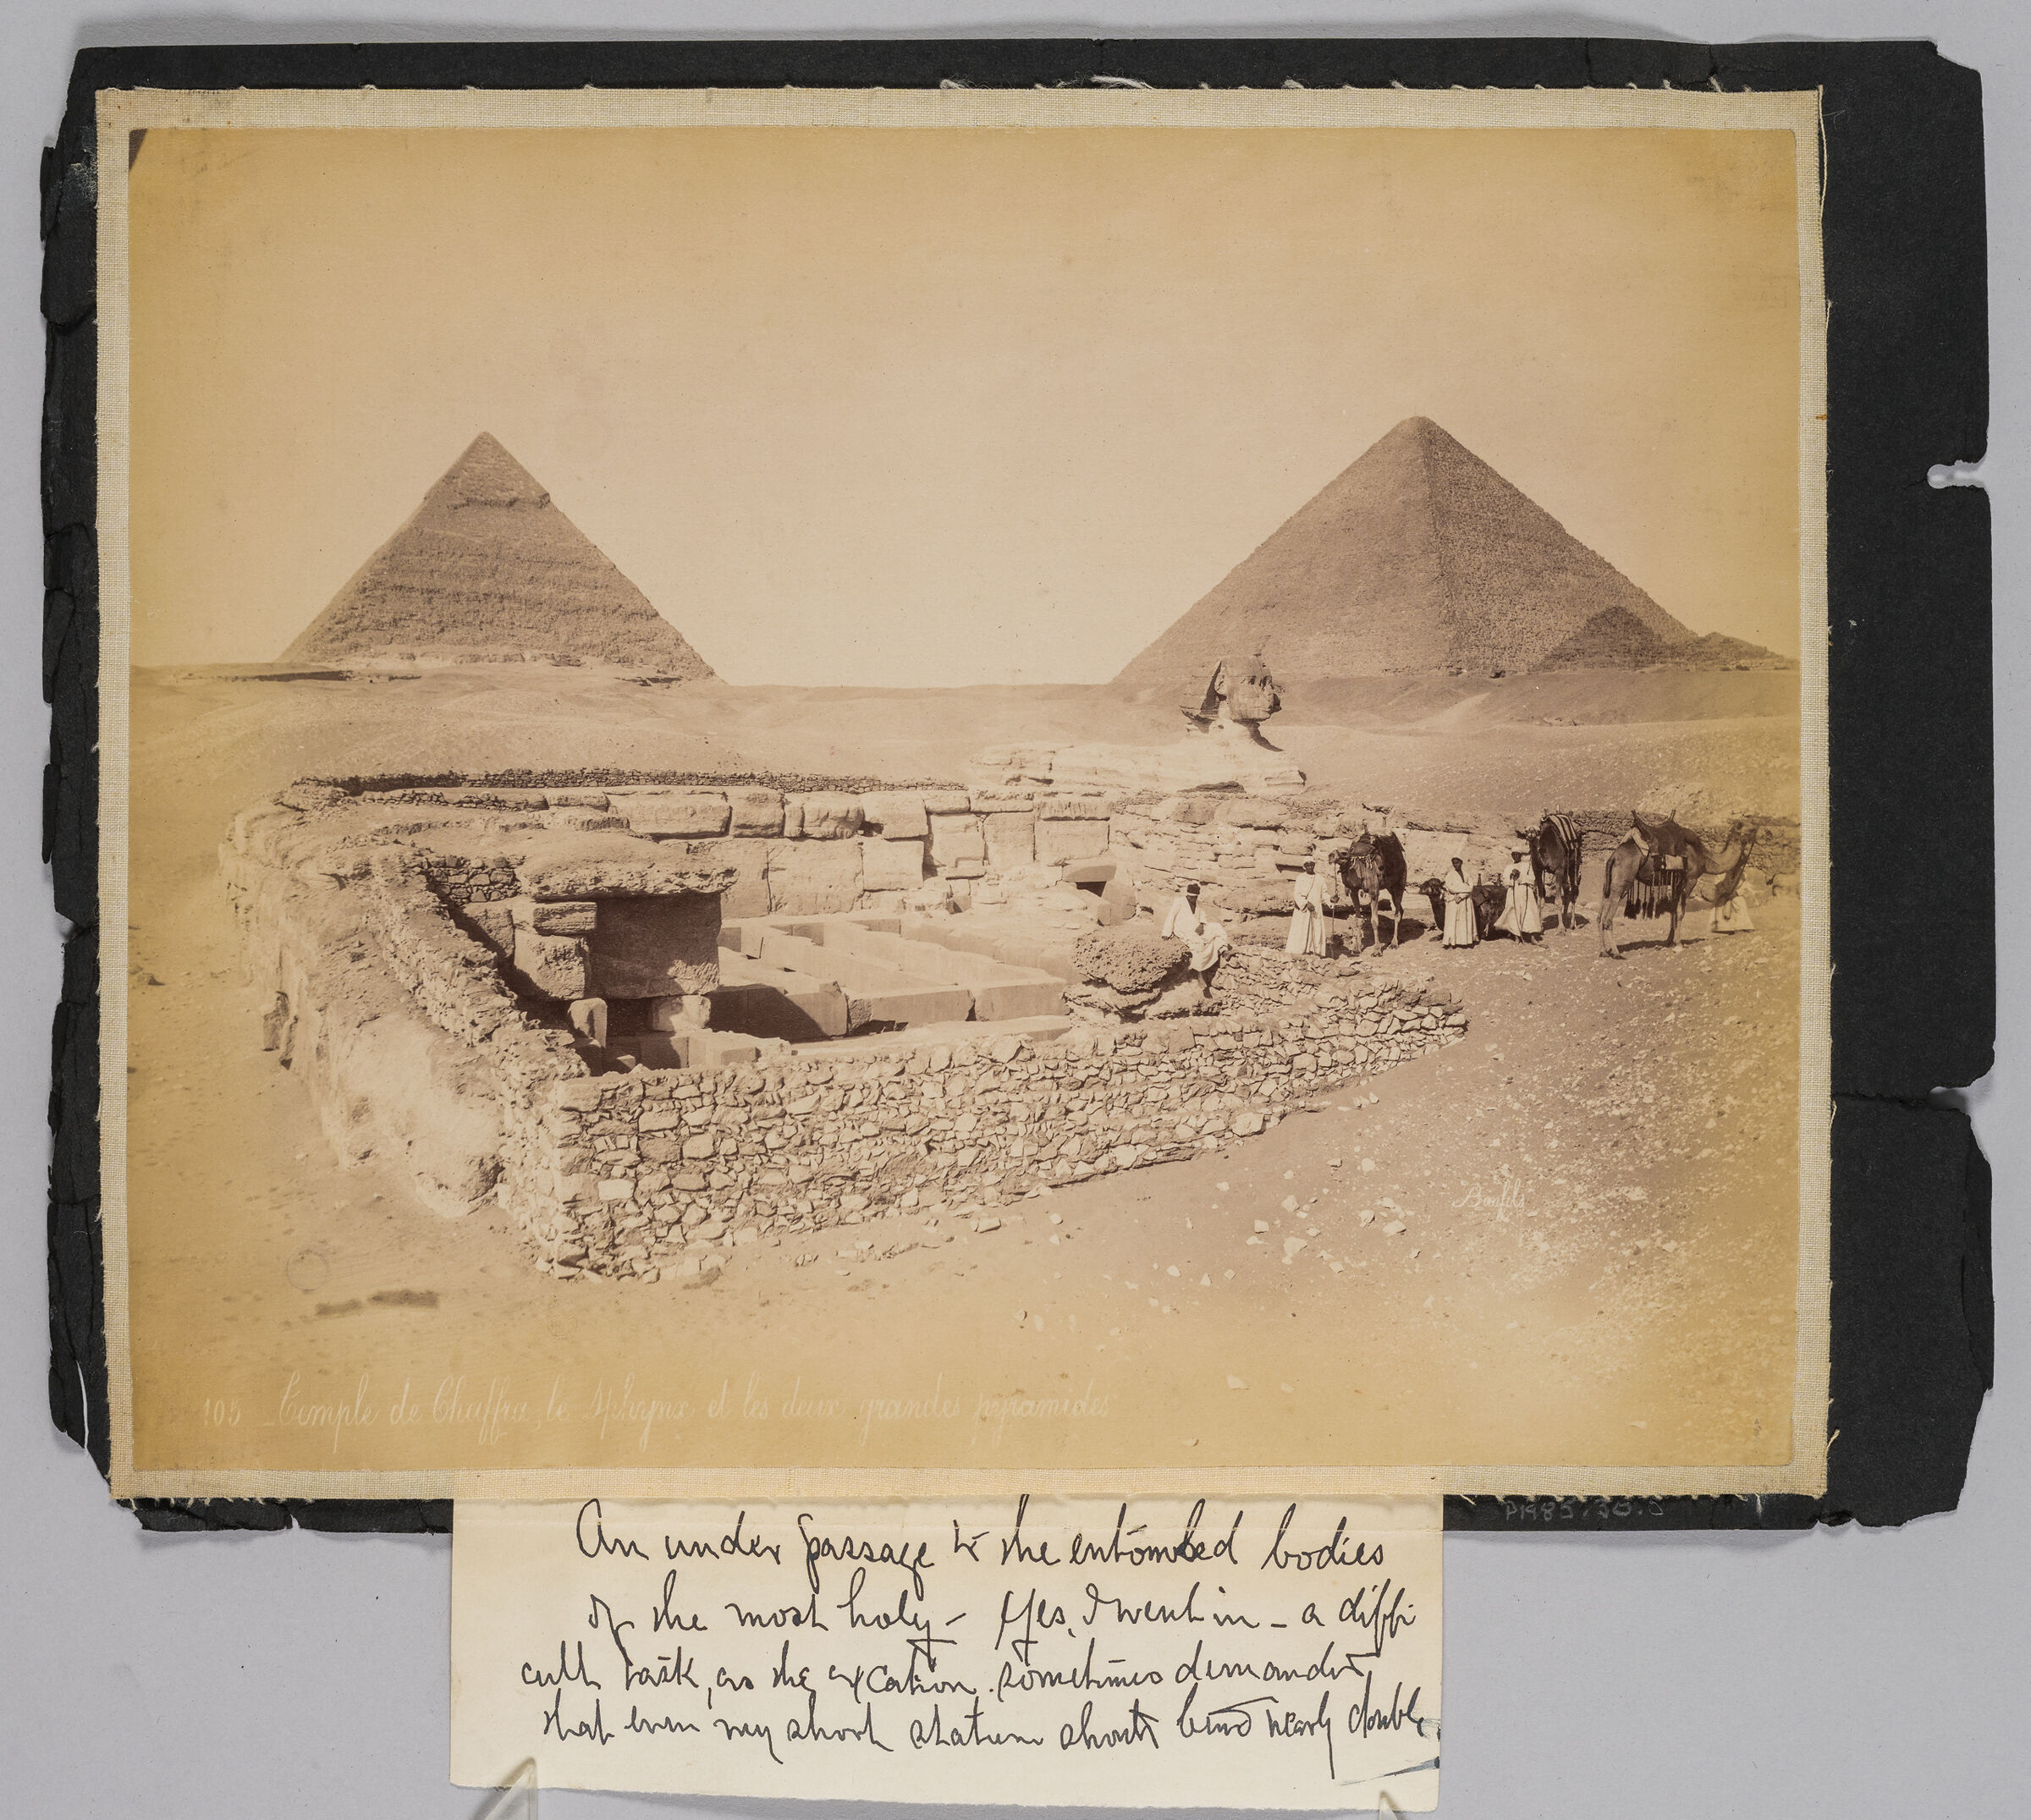 The Temple Of Chaffra, The Sphinx And Two Pyramids